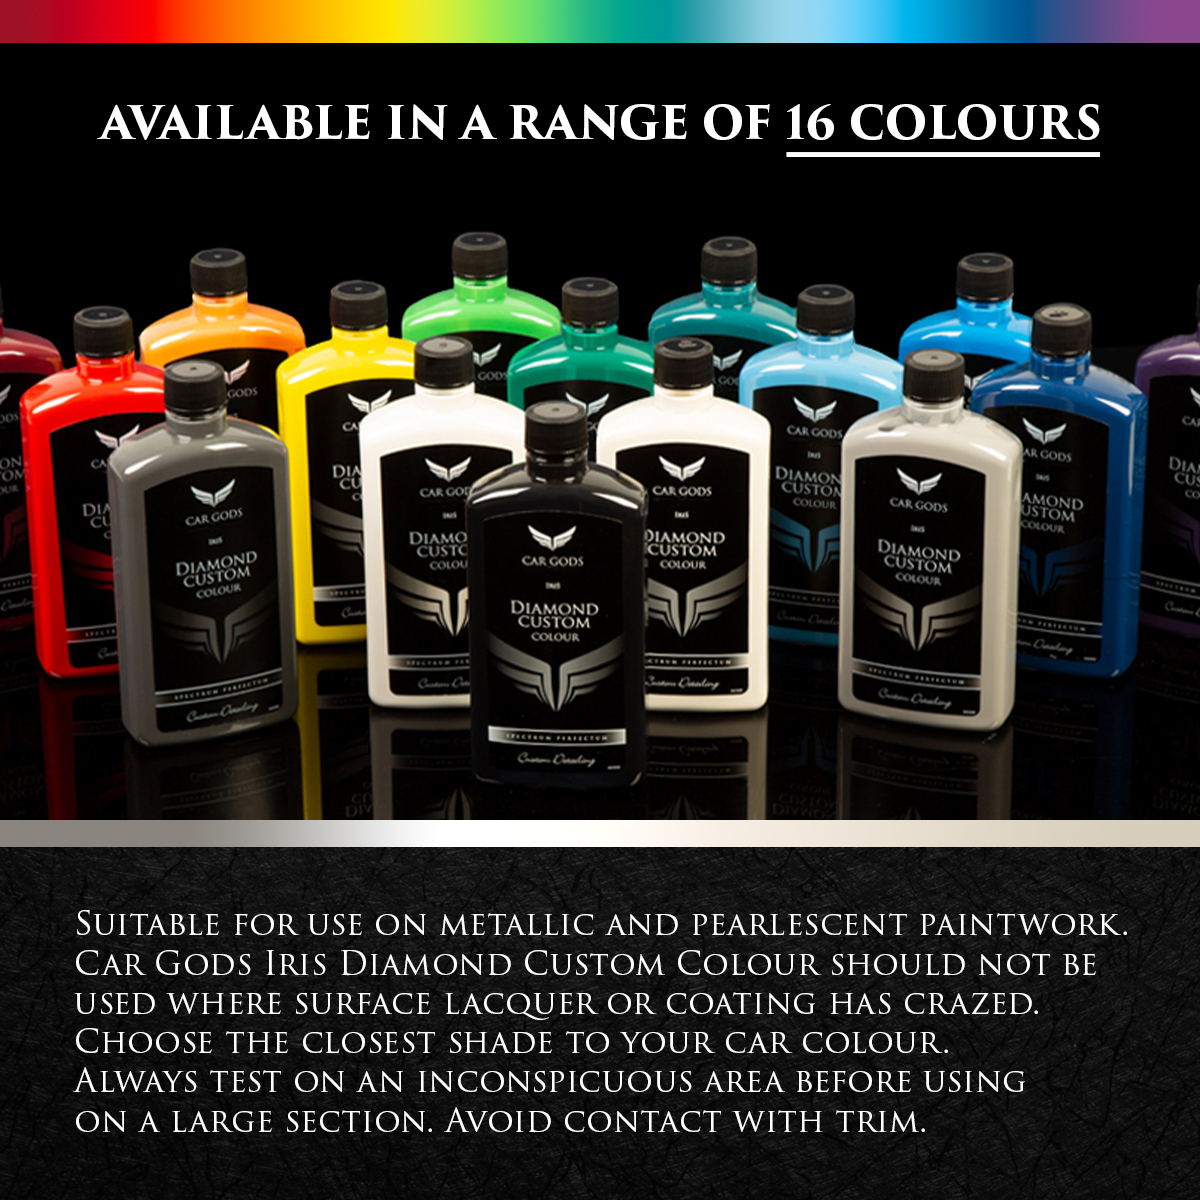 Available in a range of 16 colours. Diamond Custom Colour is suitable for use on metallic and pearlescent paintwork. Choose the closest shade to your car colour. Always test on an inconspicuous area before using on a large section.